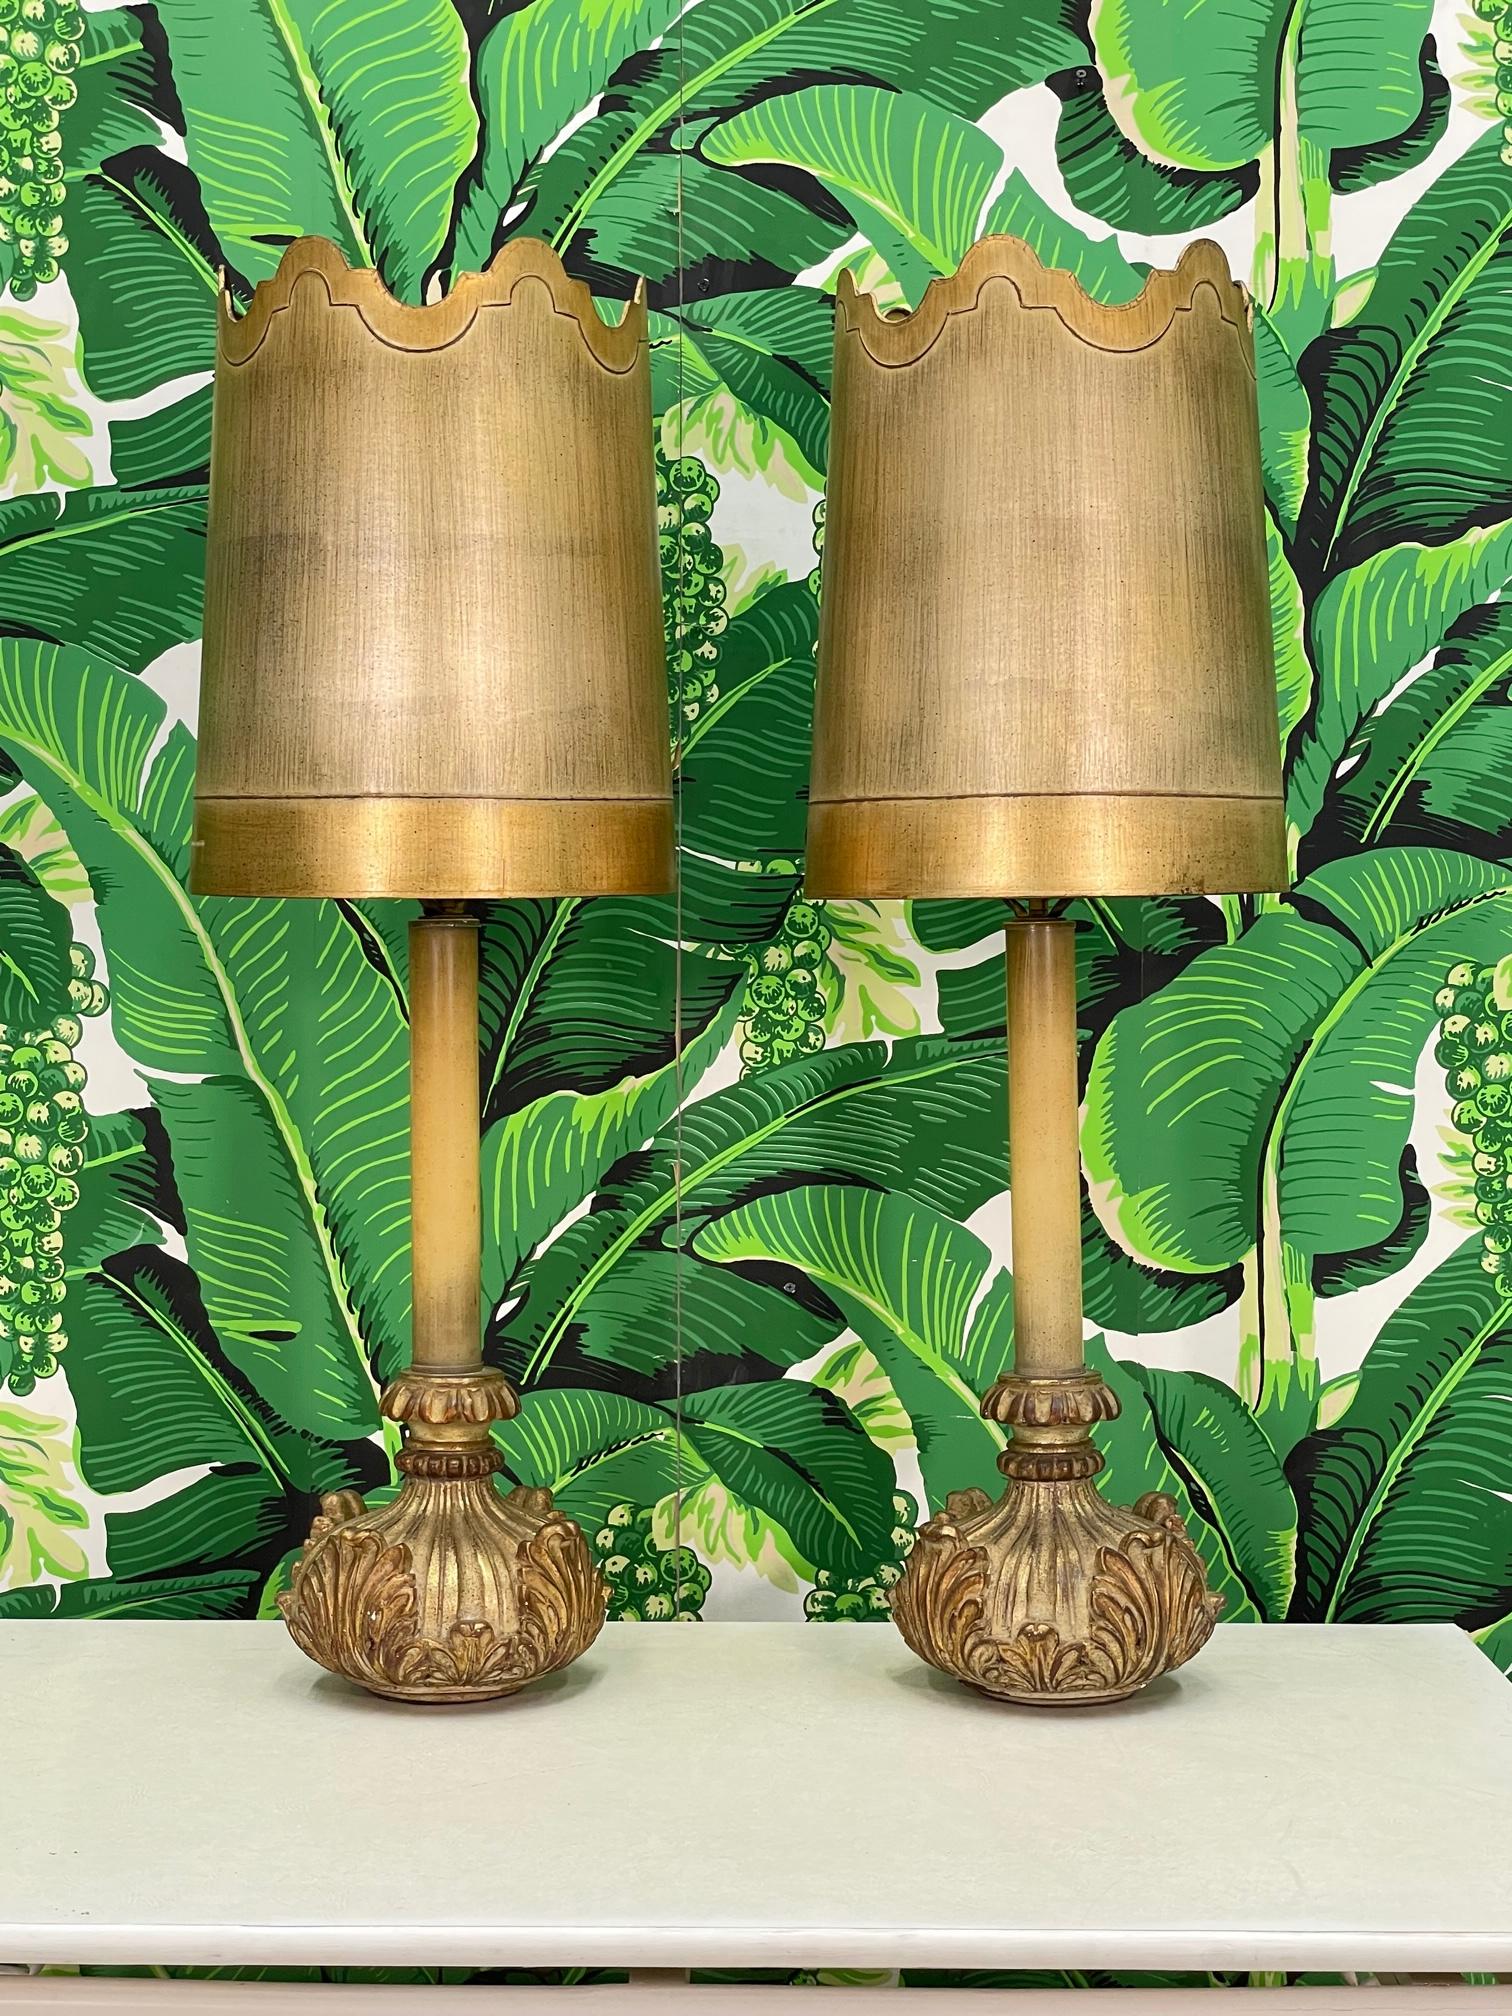 Pair of mid century table lamps feature style very similar to Dorothy Draper's iconic aesthetic with their botanical molded plaster bases and shapely cut shades. Good condition with minor imperfections consistent with age, see photos for condition